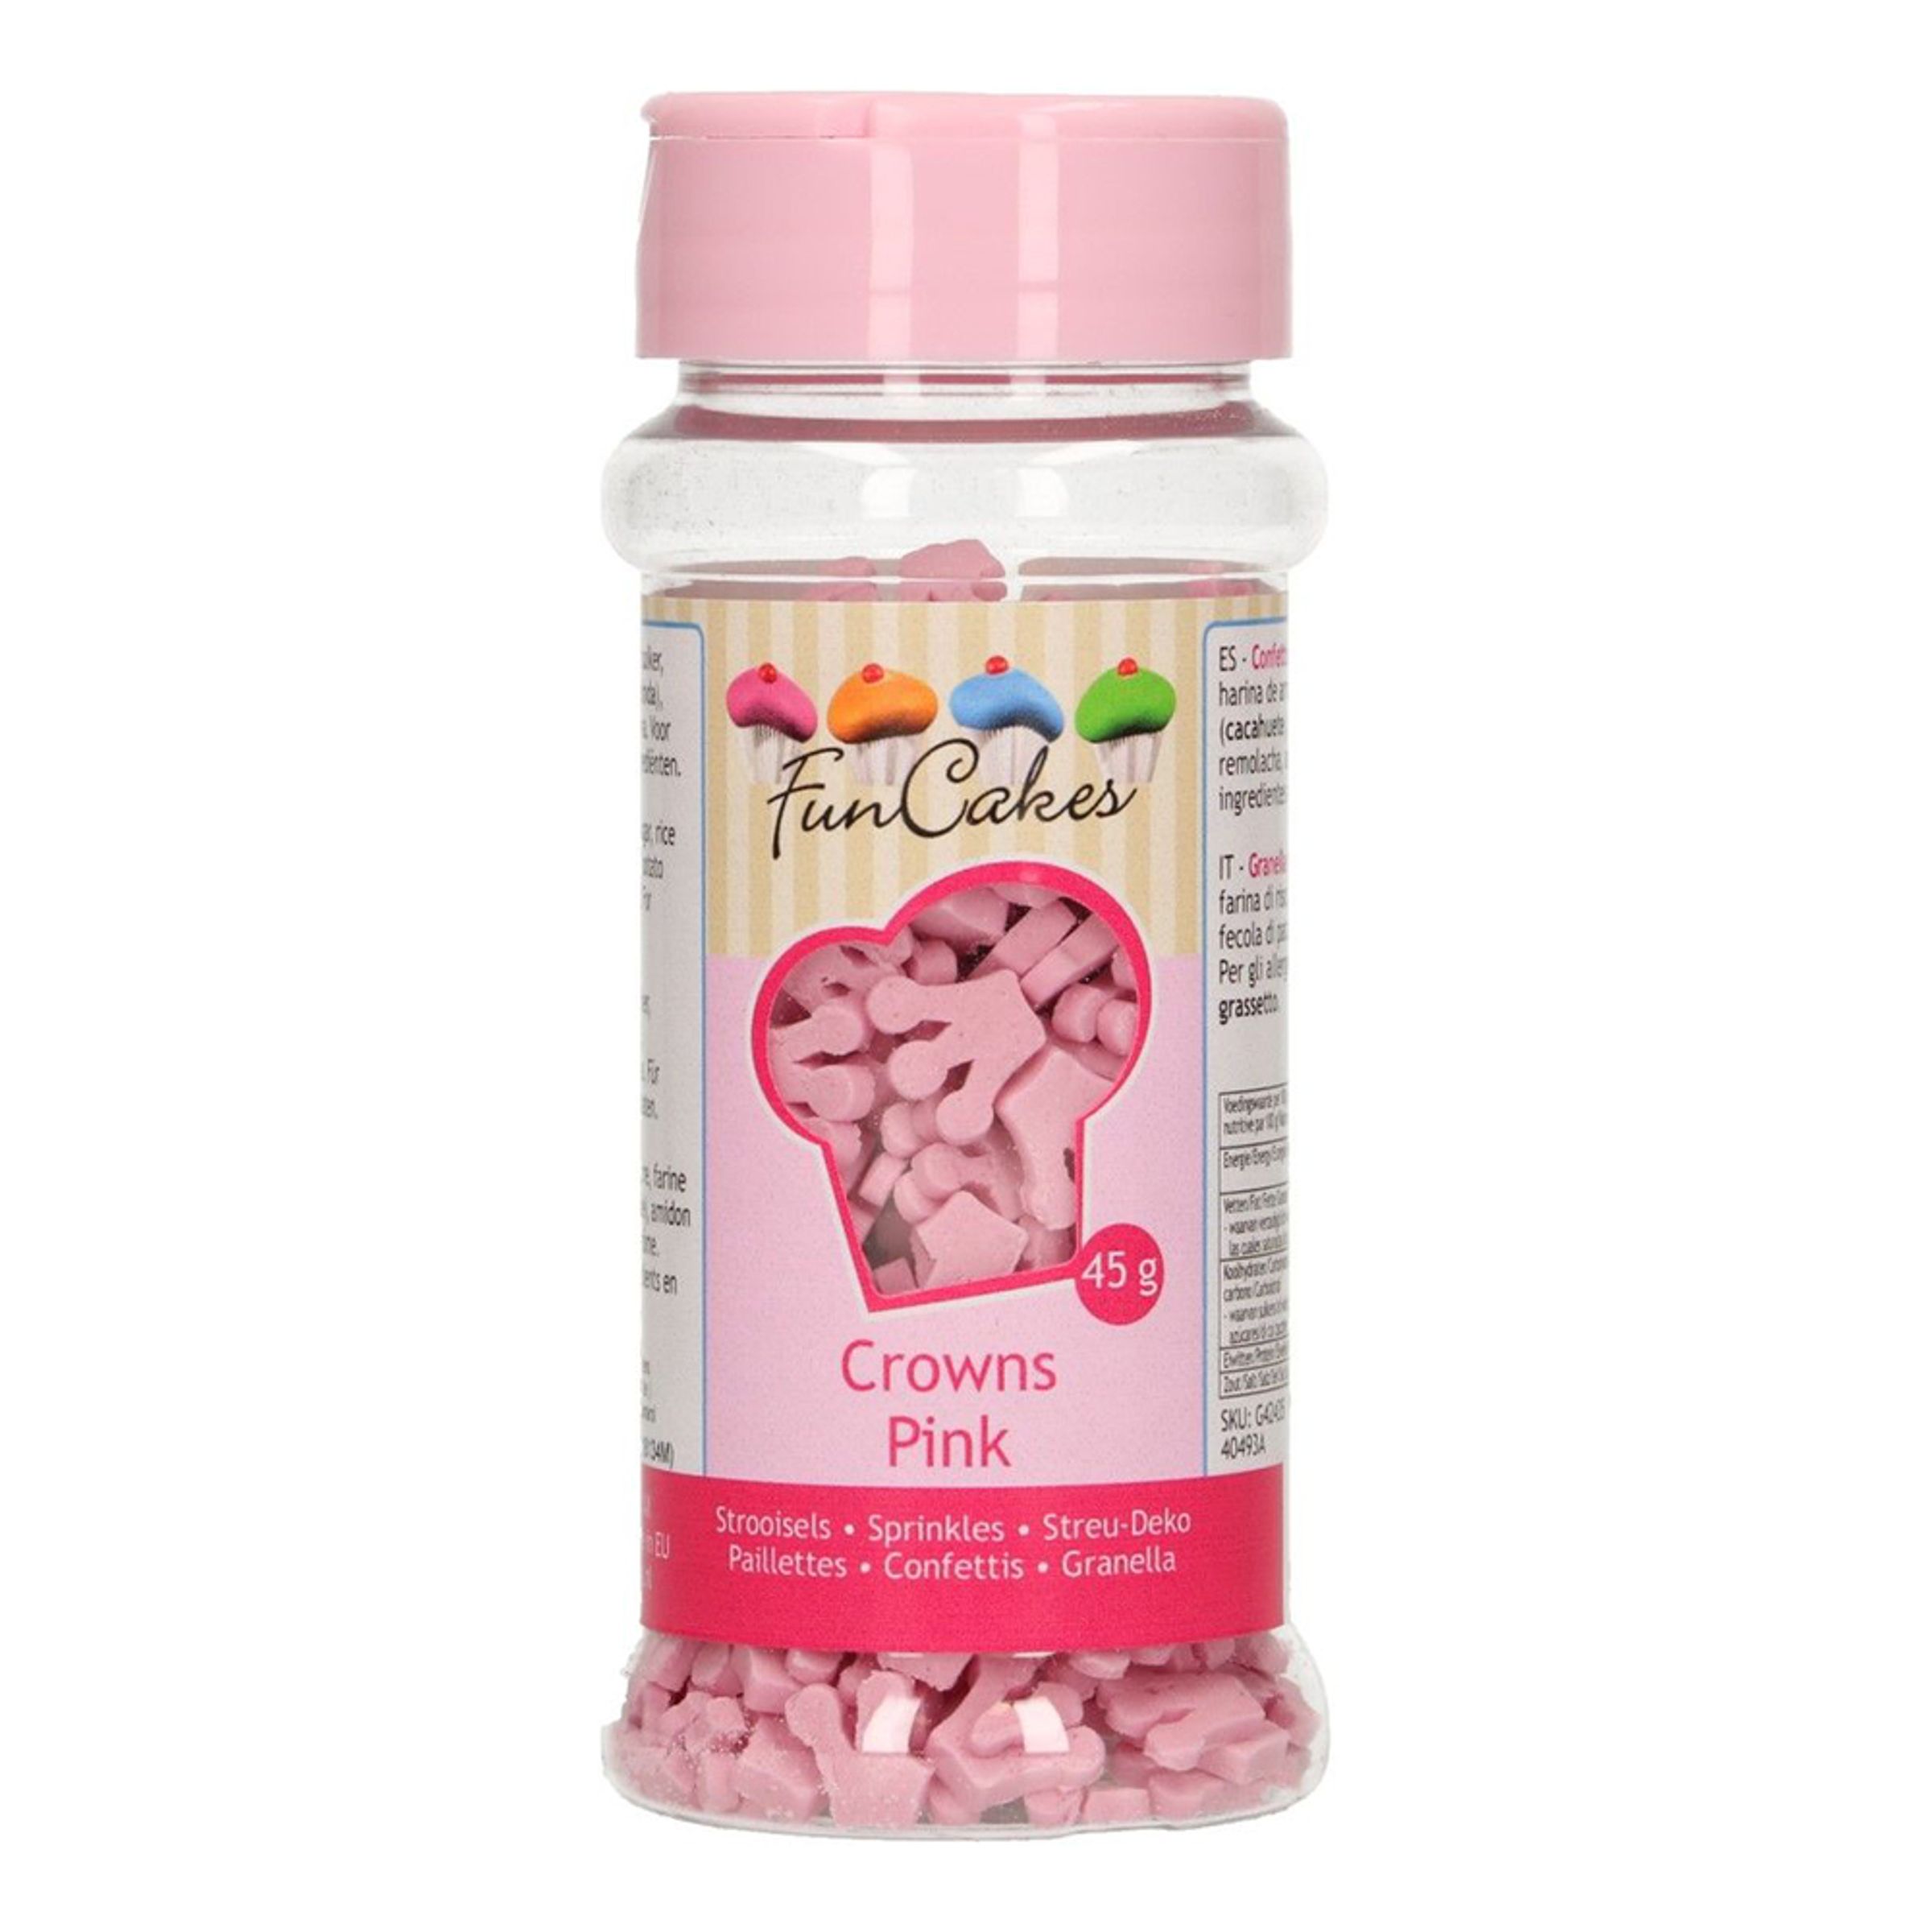 FunCakes Crowns Pink/Rosa - 45g